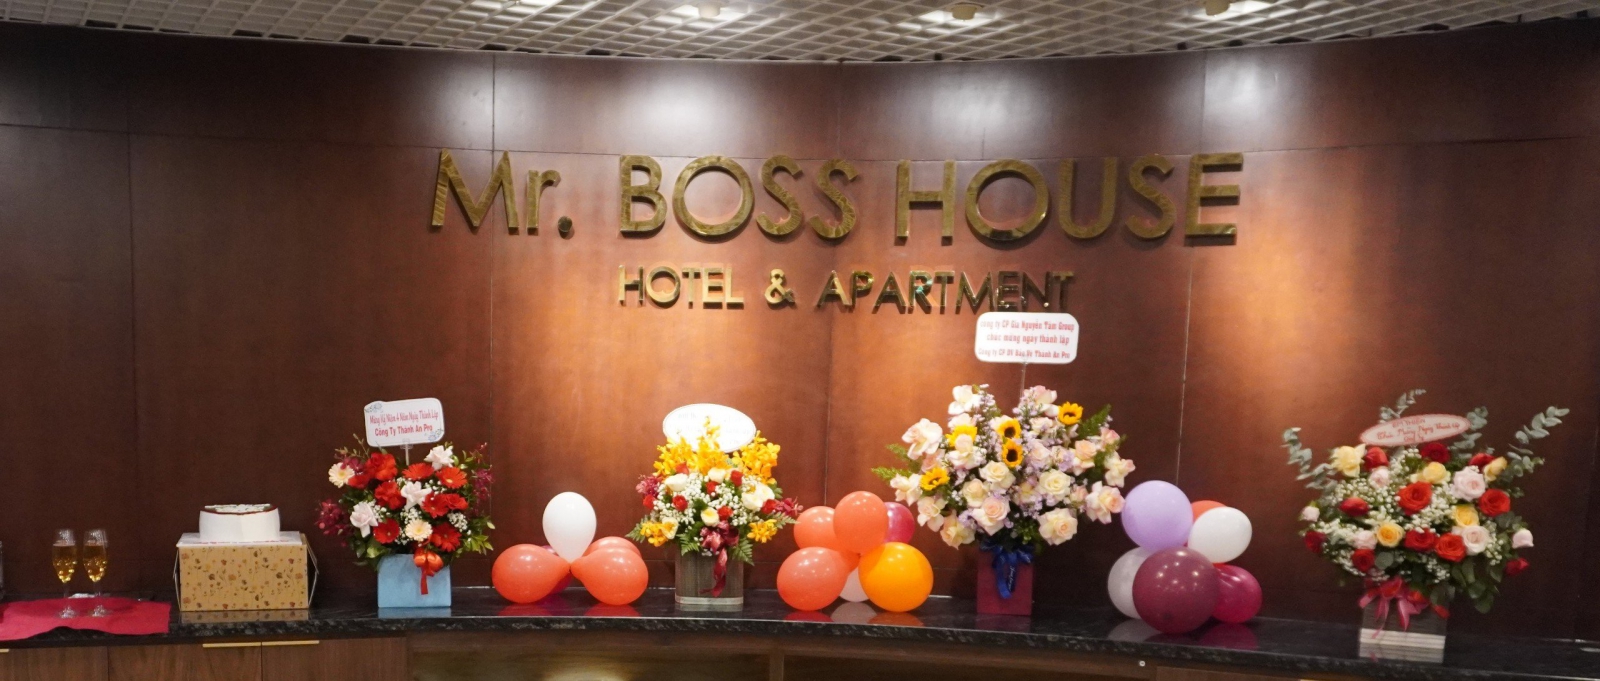 The ceremony was prepared at MR Boss House hotel